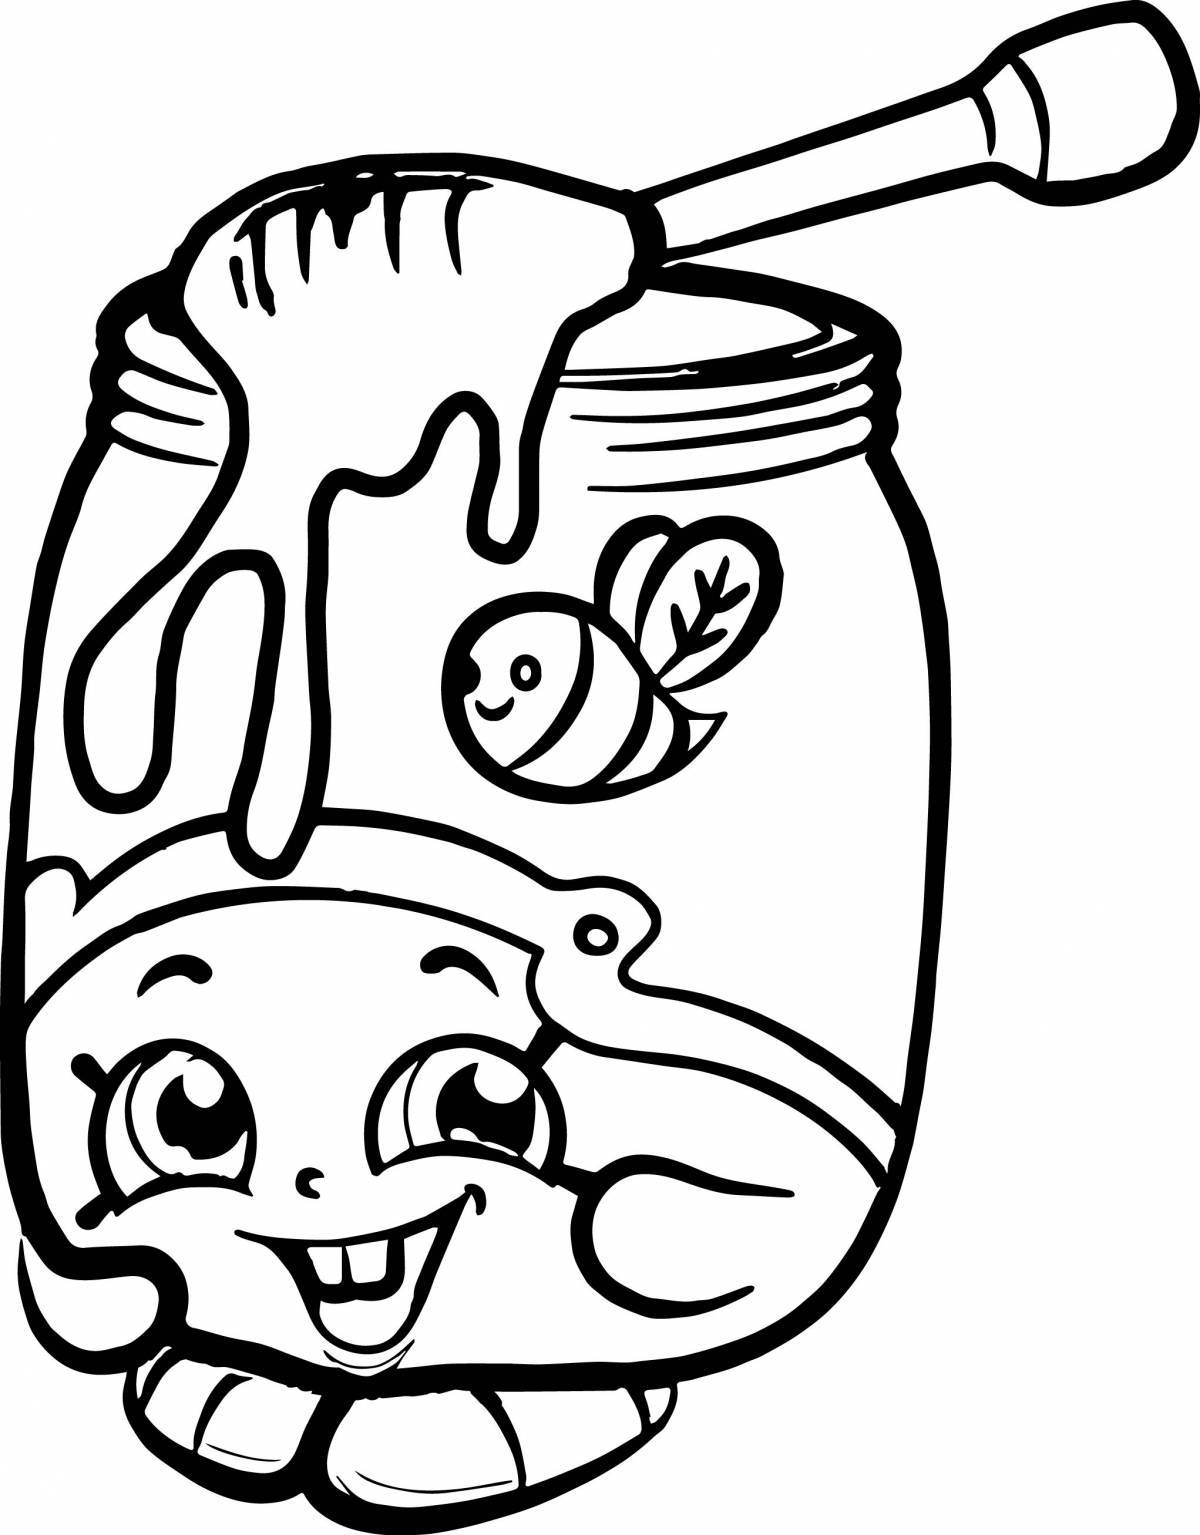 Colorful shopkins coloring page